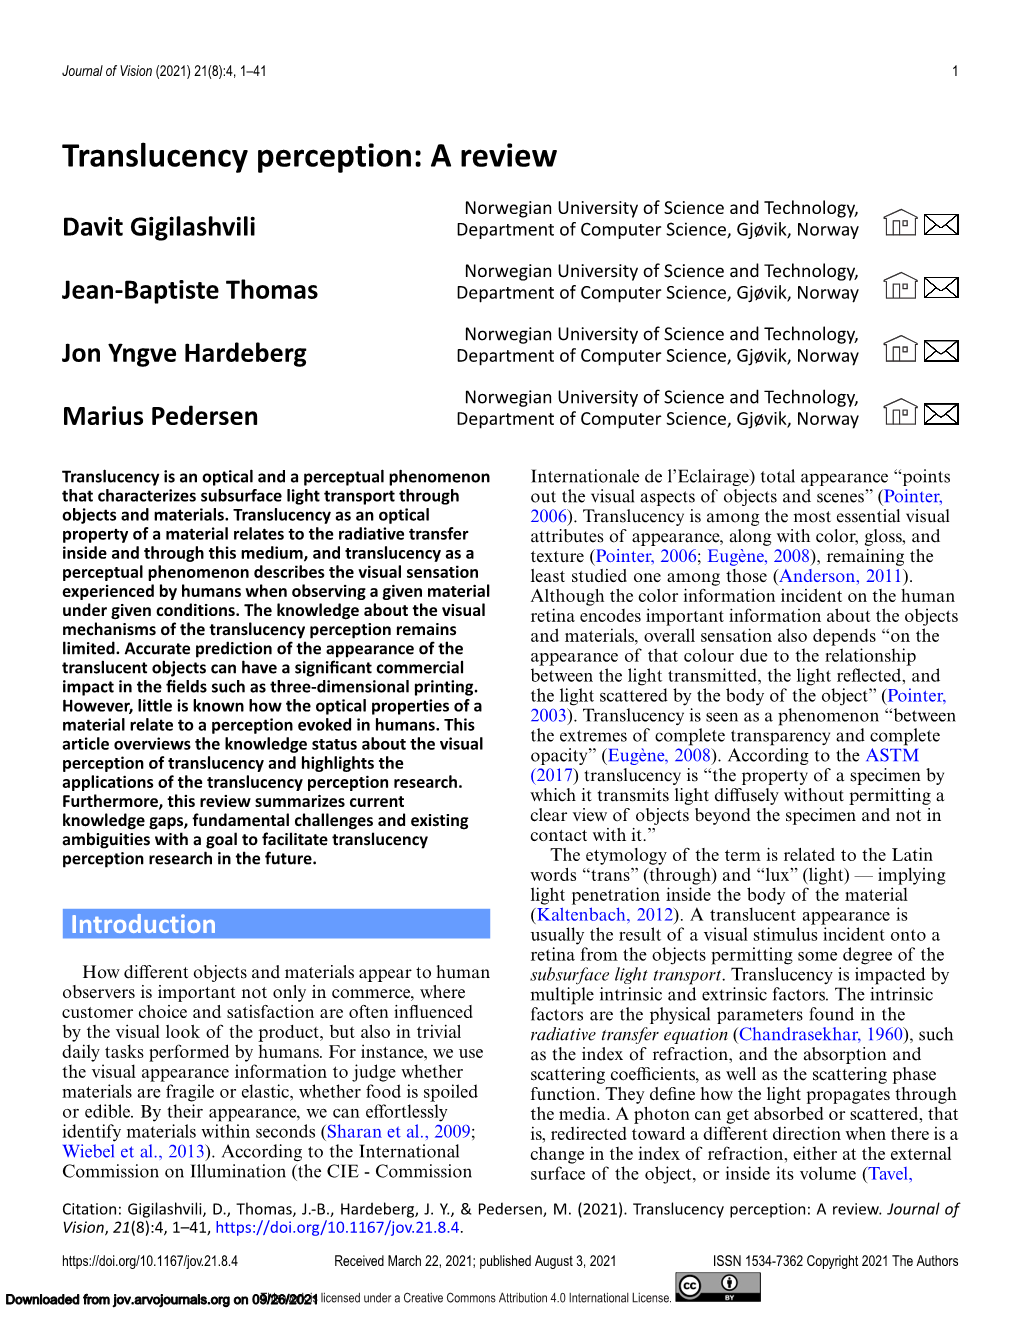 Translucency Perception: a Review